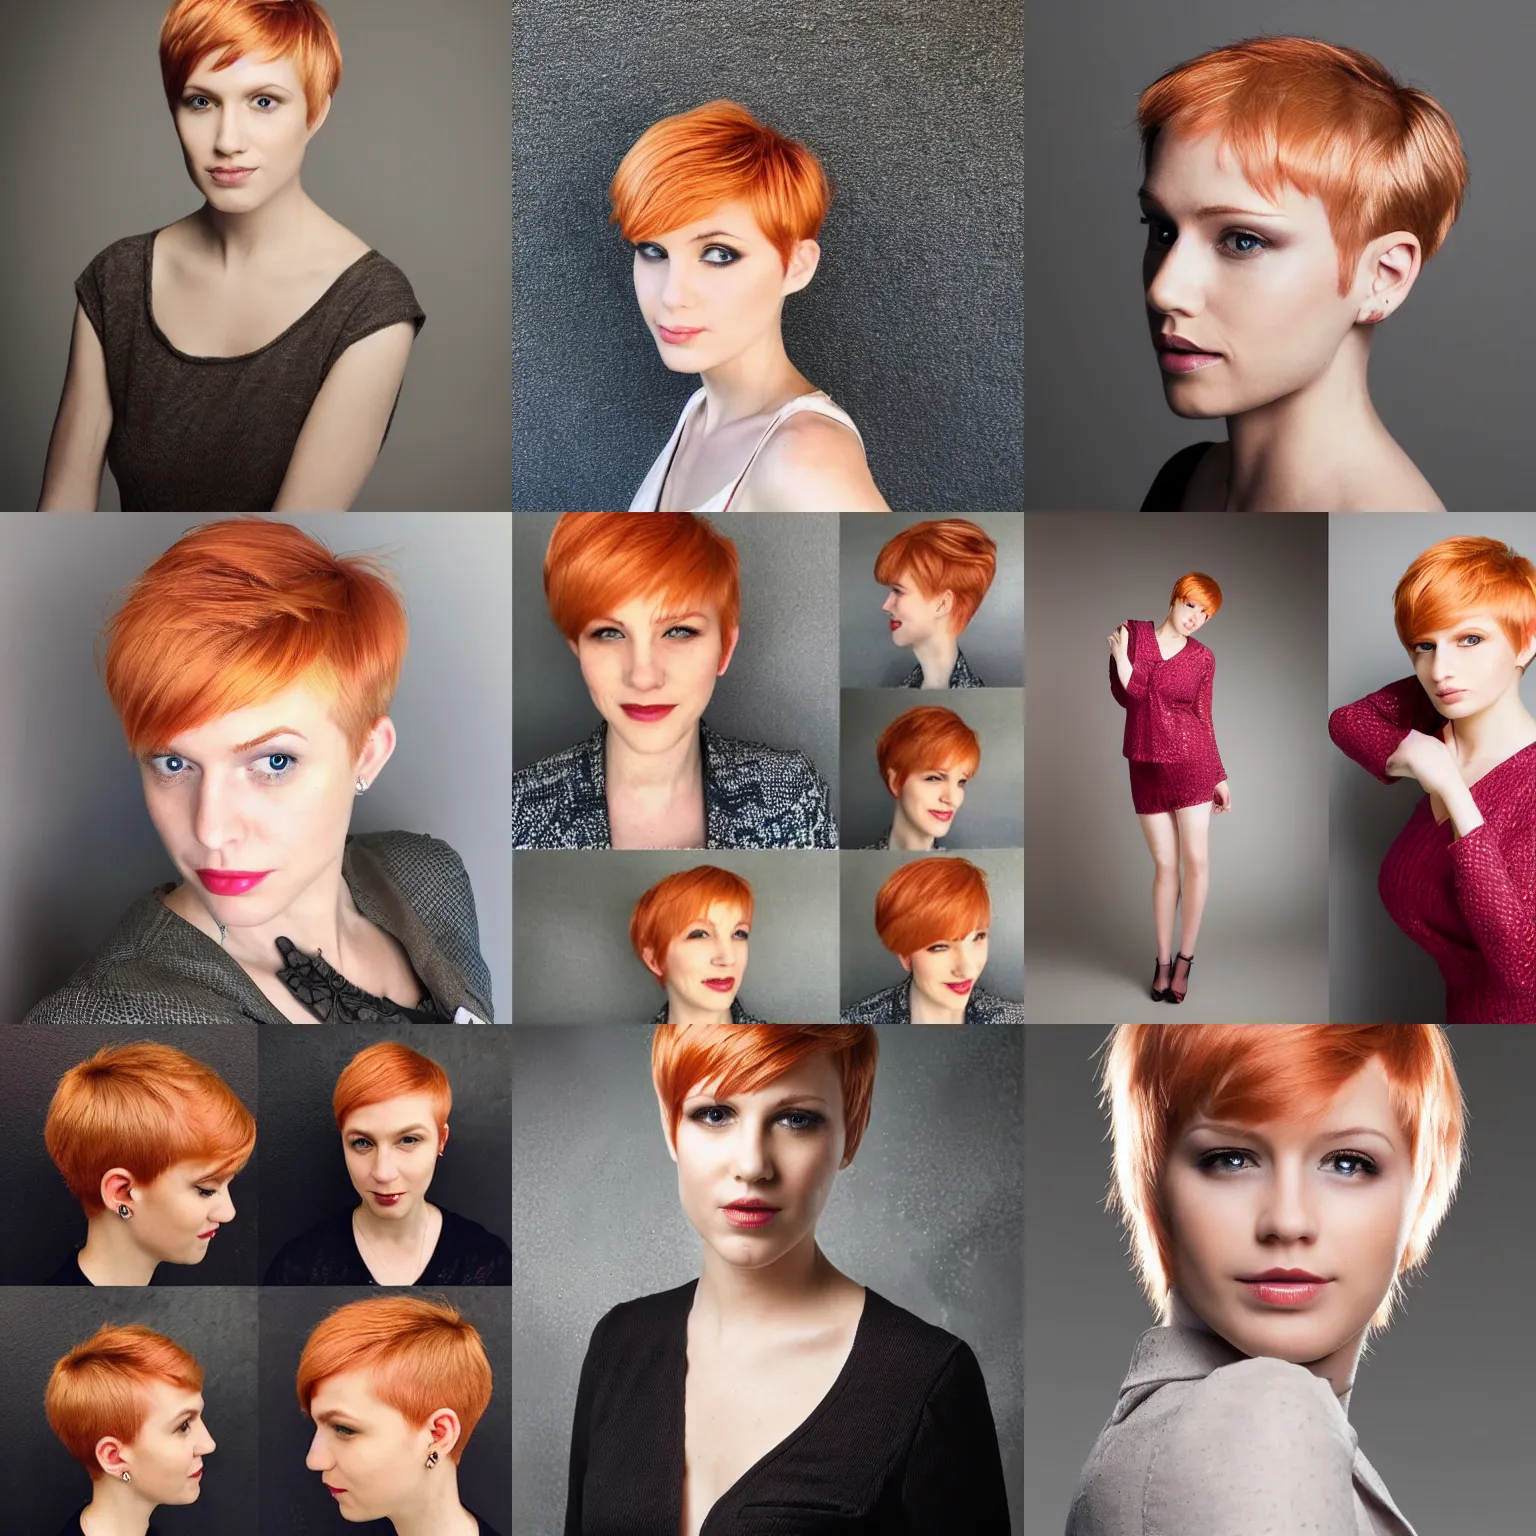 strawberry blond pixie cut, professional fashion photo | Stable ...